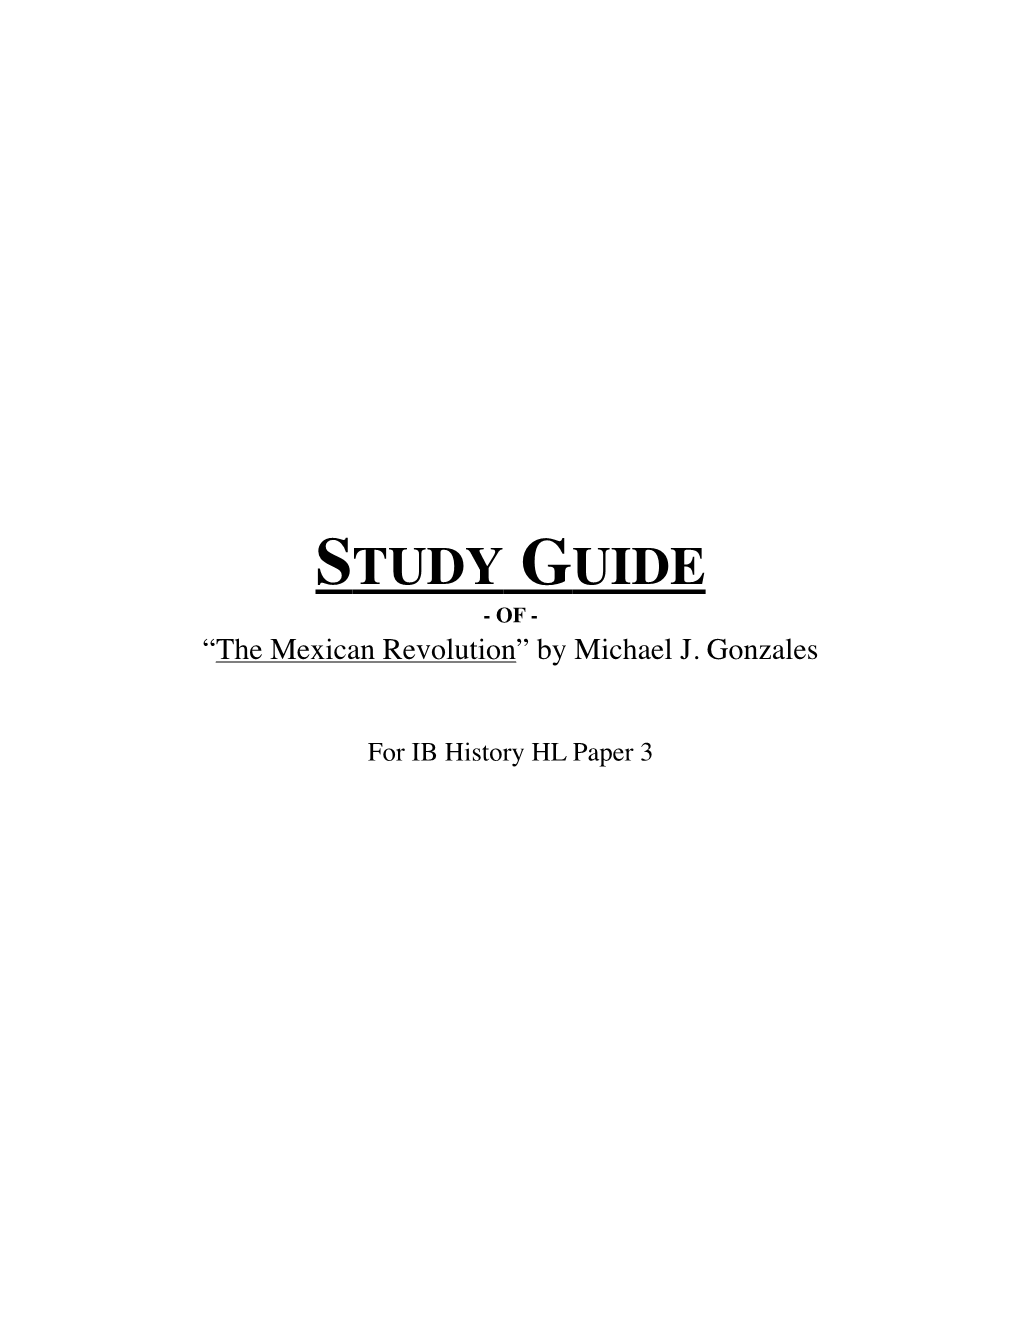 Mexican Revolution Study Guide